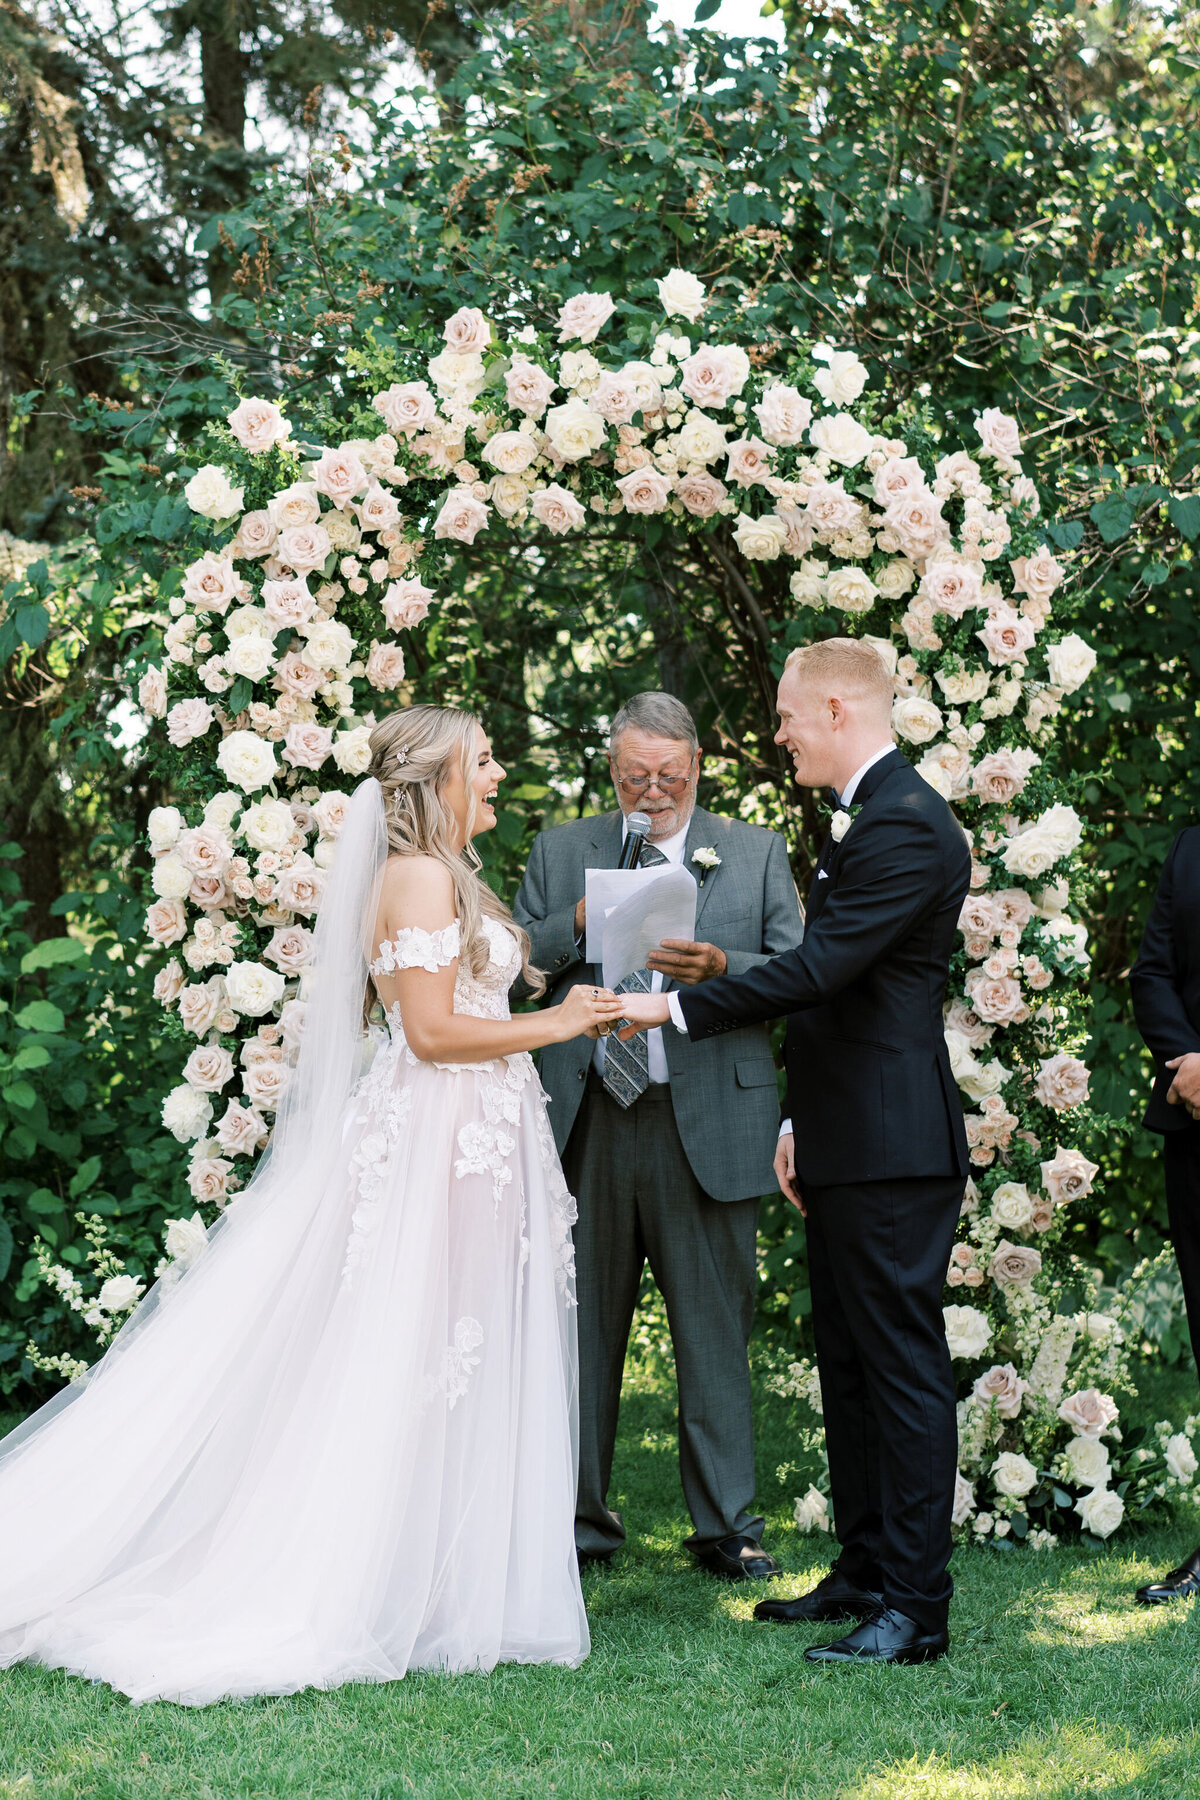 A couple stands facing each other during an outdoor wedding ceremony. Under a circular flower arch, a man officiates as the bride in a white gown and veil, and the groom in a black suit, exchange vows. The exquisite wedding design is courtesy of their full wedding planner who expertly crafted this special day.